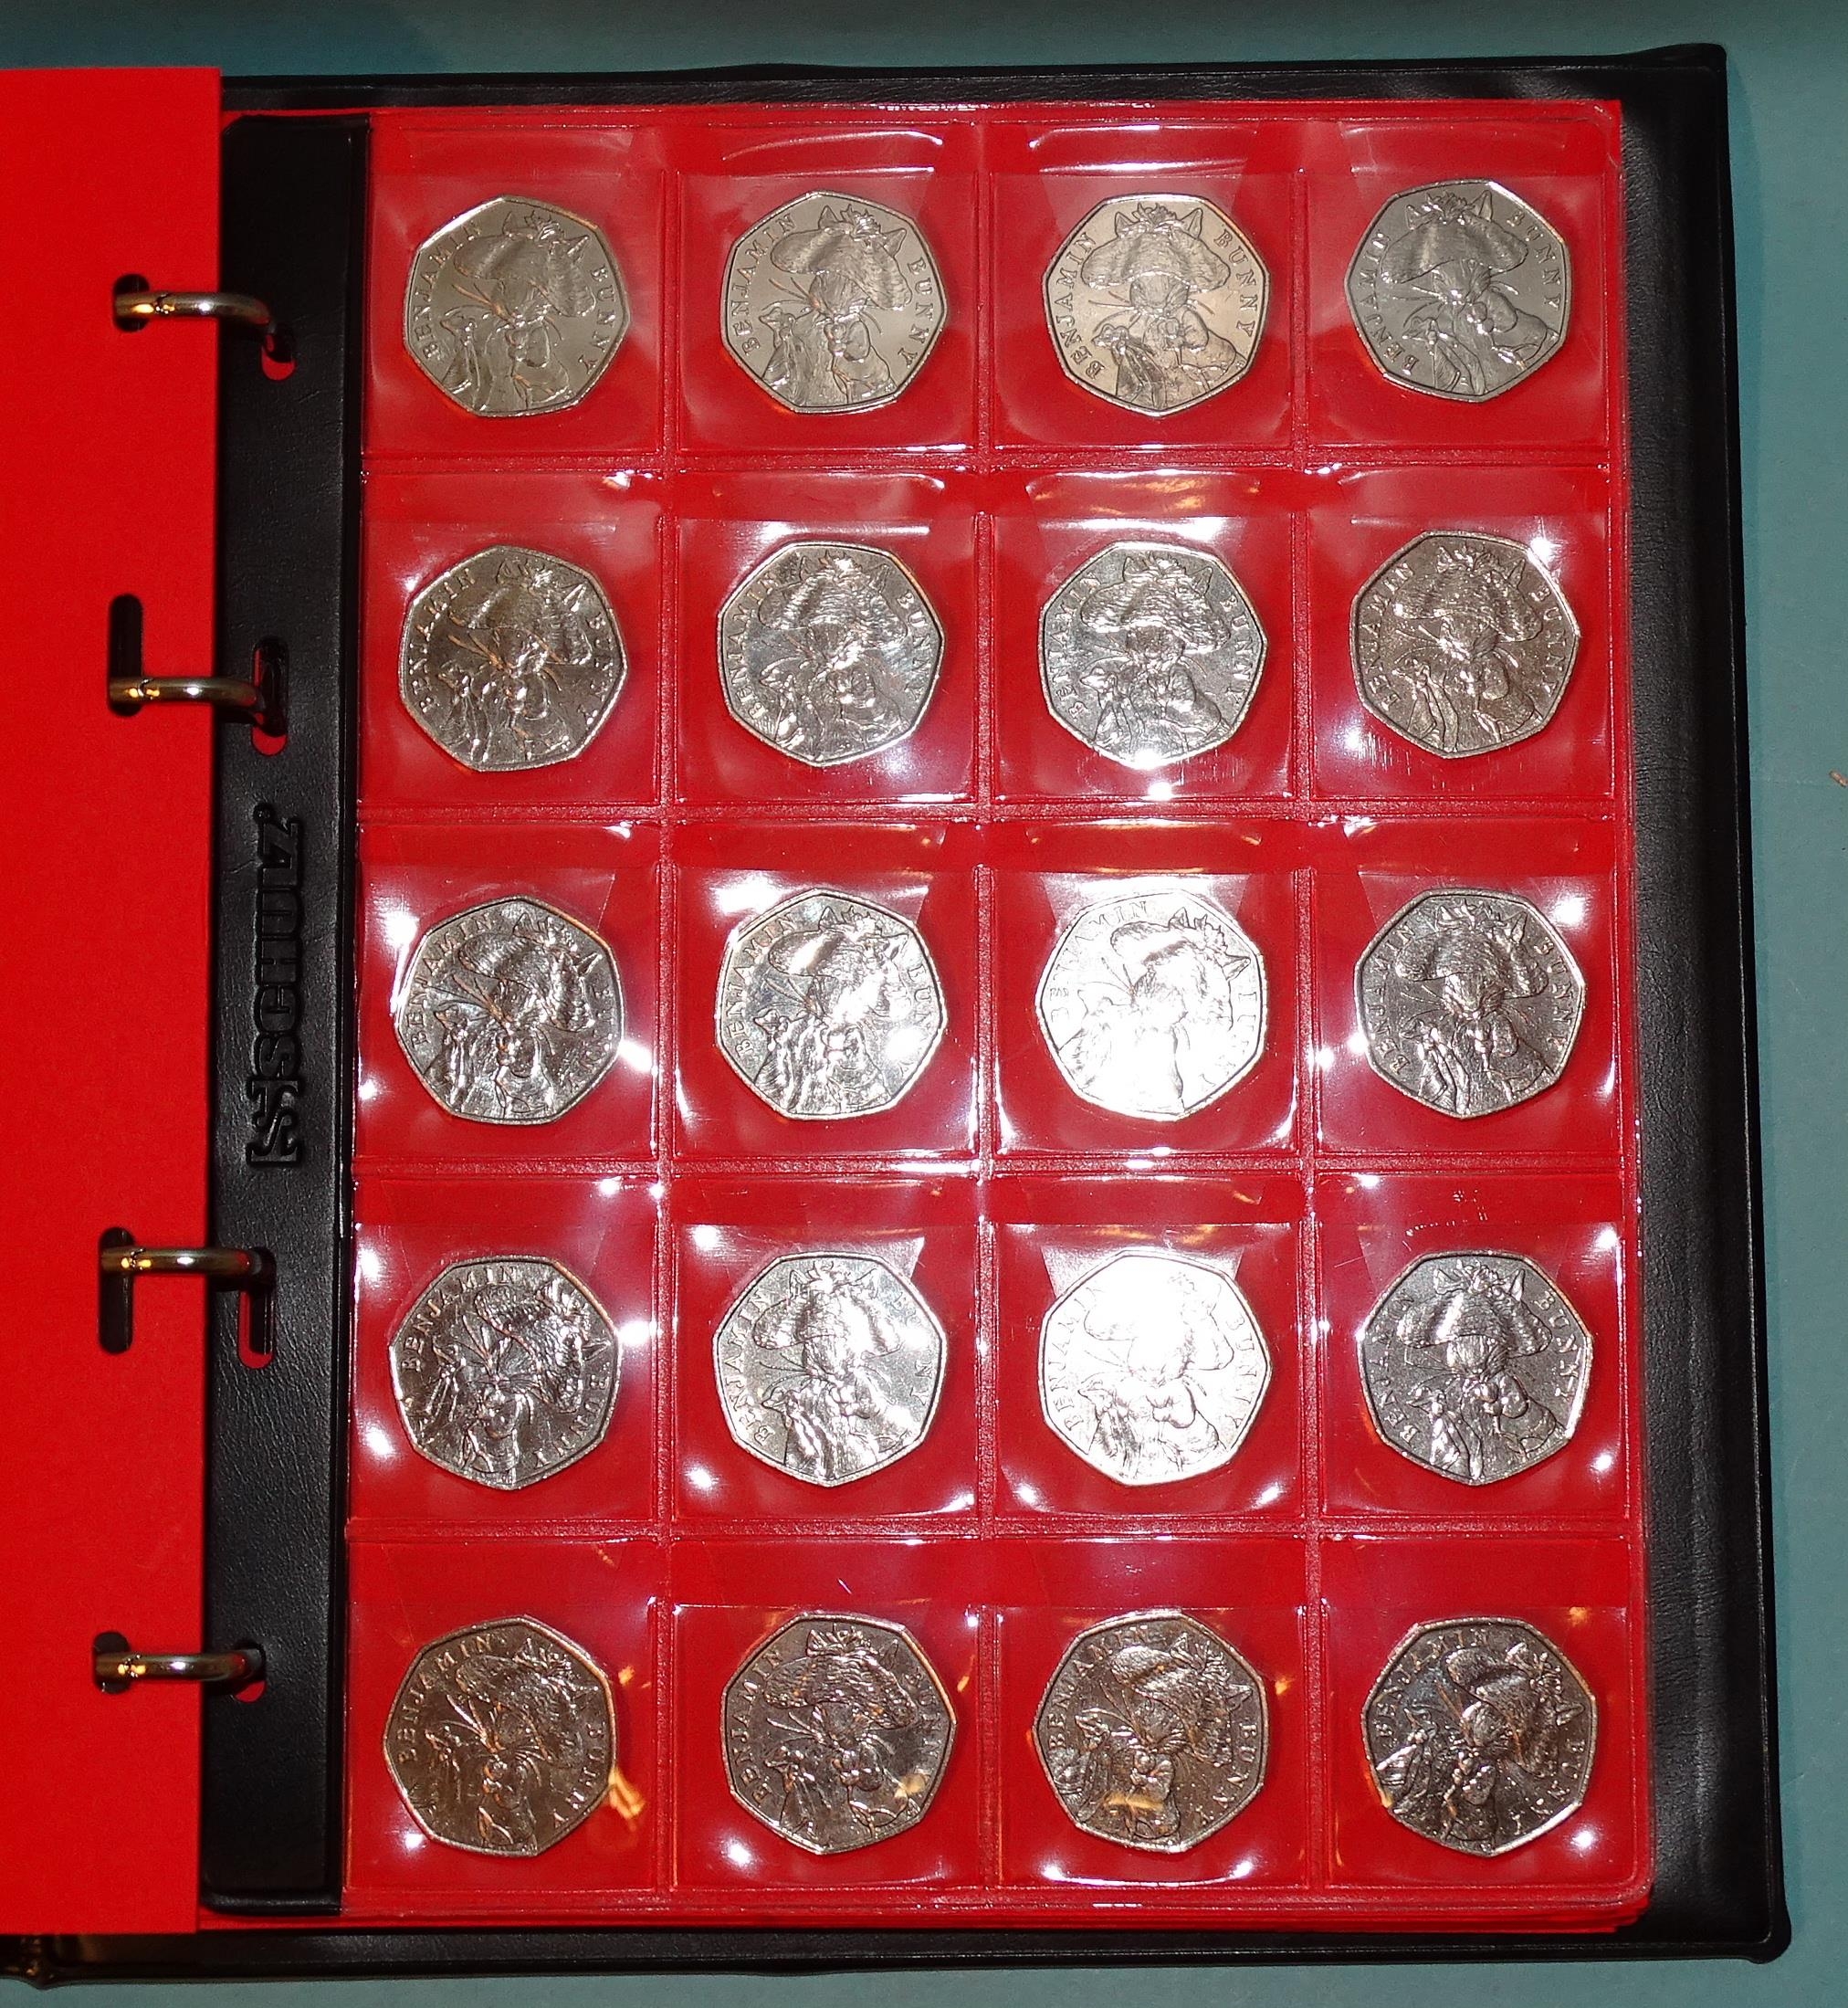 Three Schultz albums of Beatrix Potter character 50p coins 2016-2018, approximately 460 coins. - Image 3 of 3